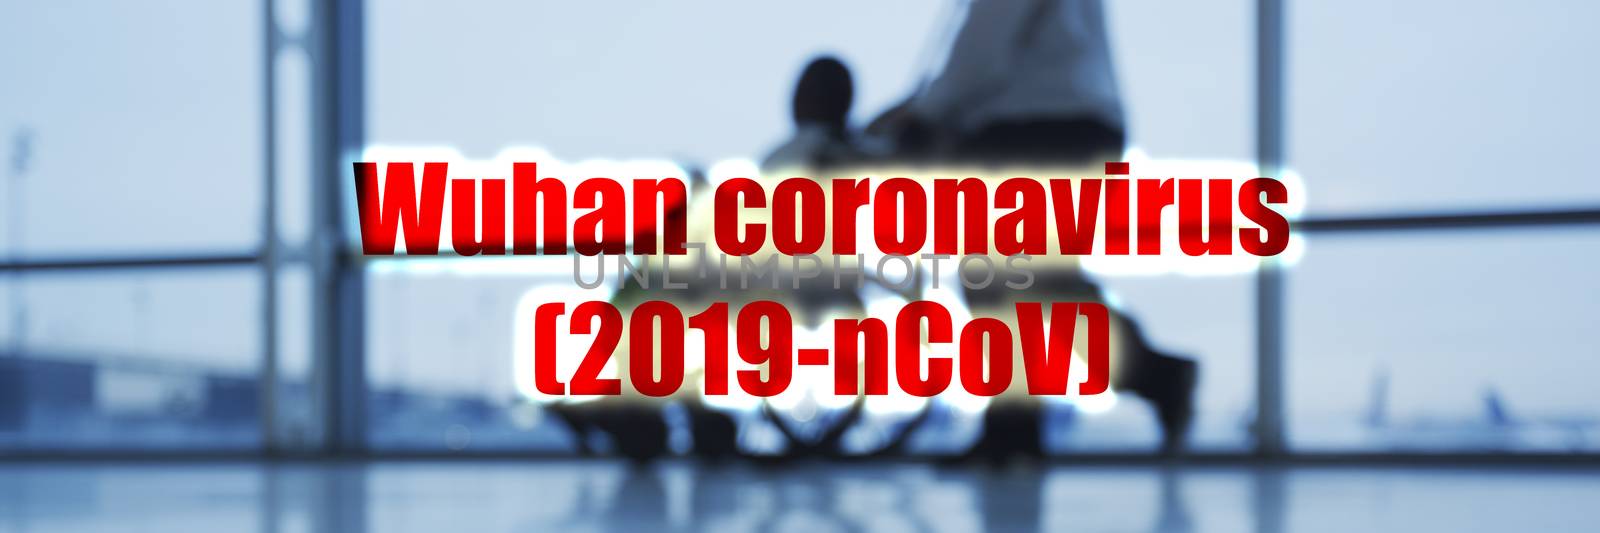 Wuhan coronavirus 2019 nCov banner background travel airport people or hospital health emergency person on wheelchair being transported in a hurry.